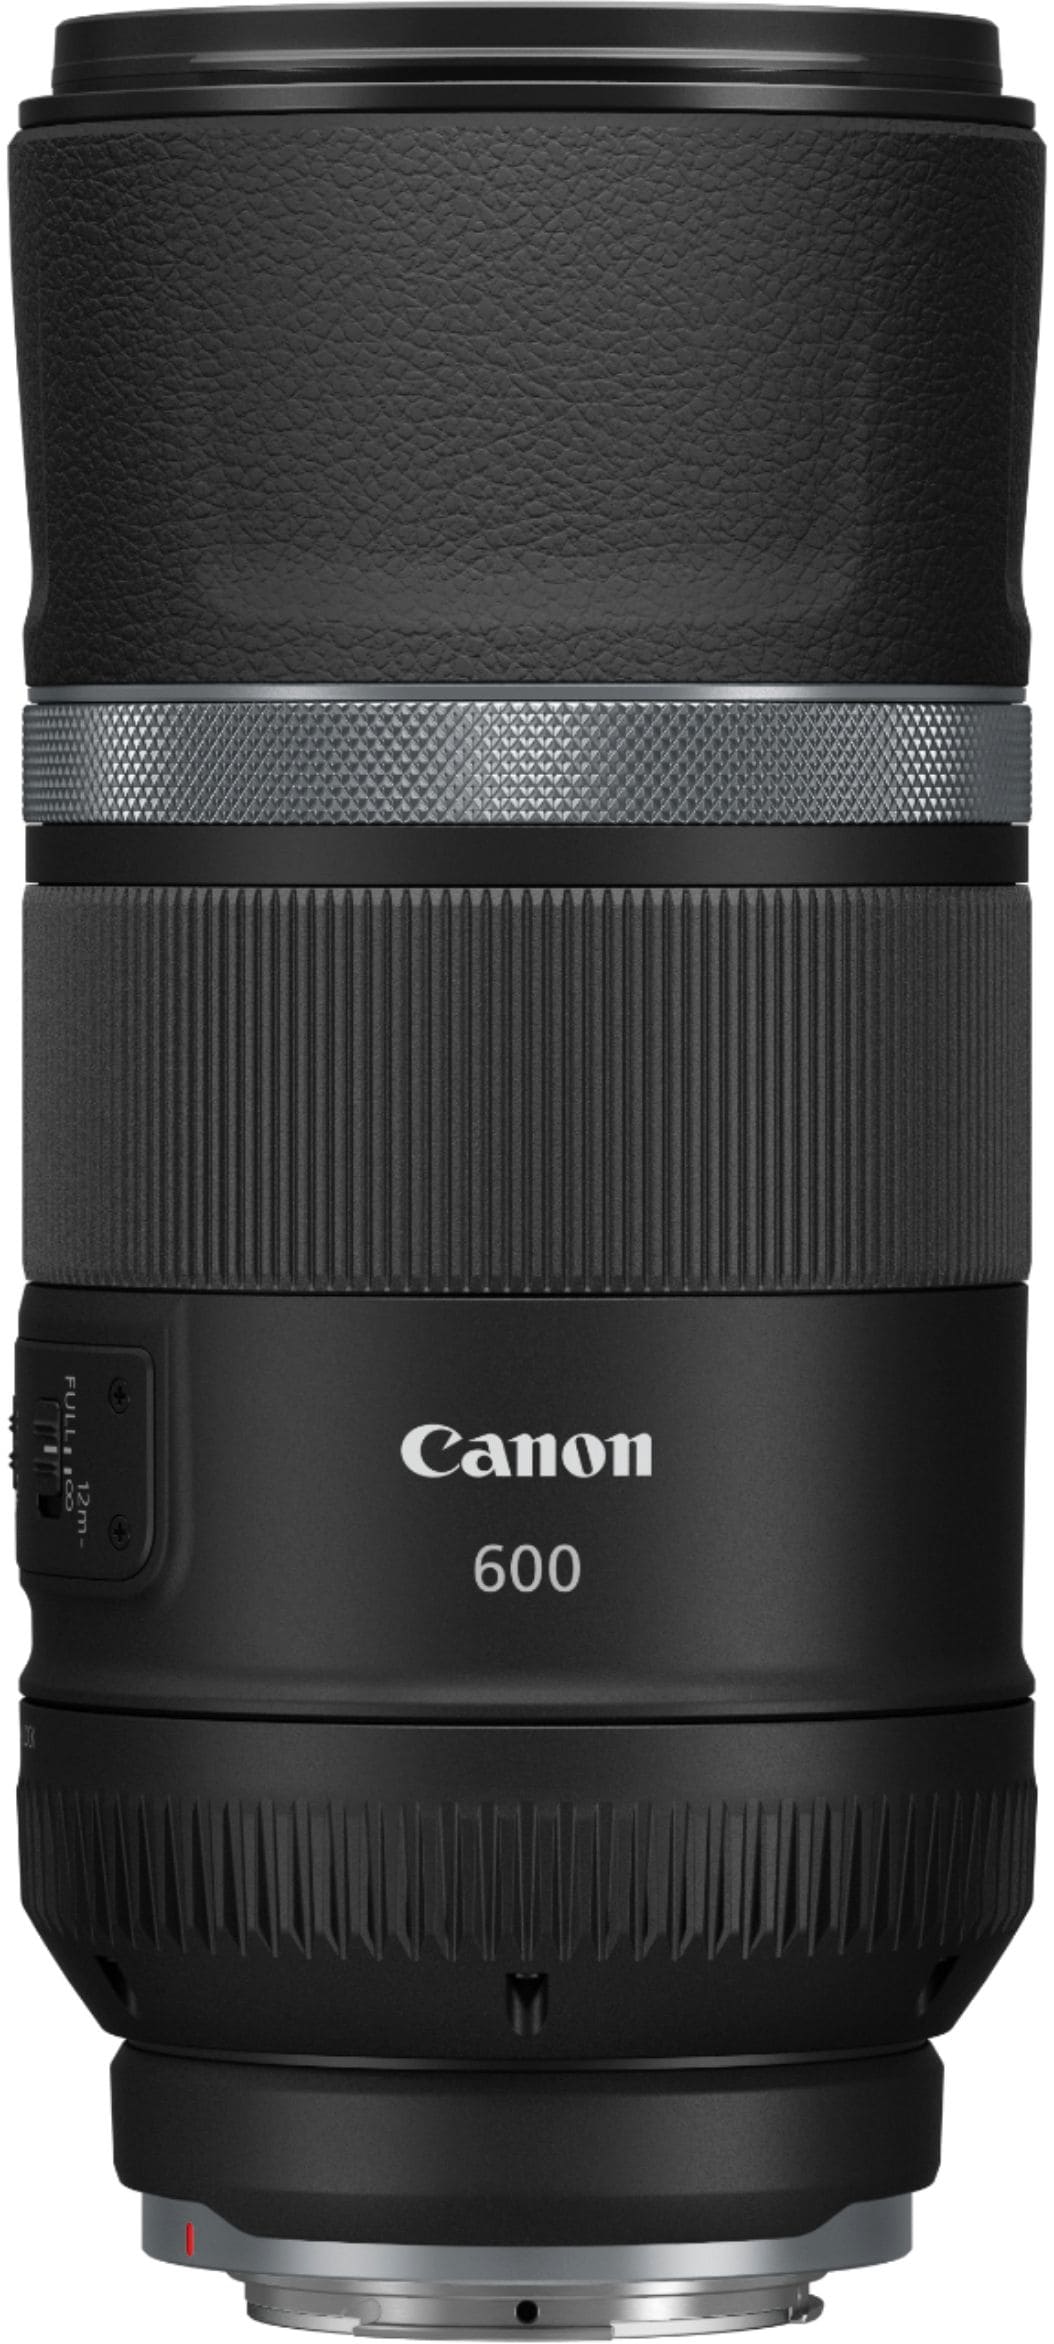 Canon - RF 600mm f/11 IS STM Telephoto Lens for EOS R Cameras - Black_3